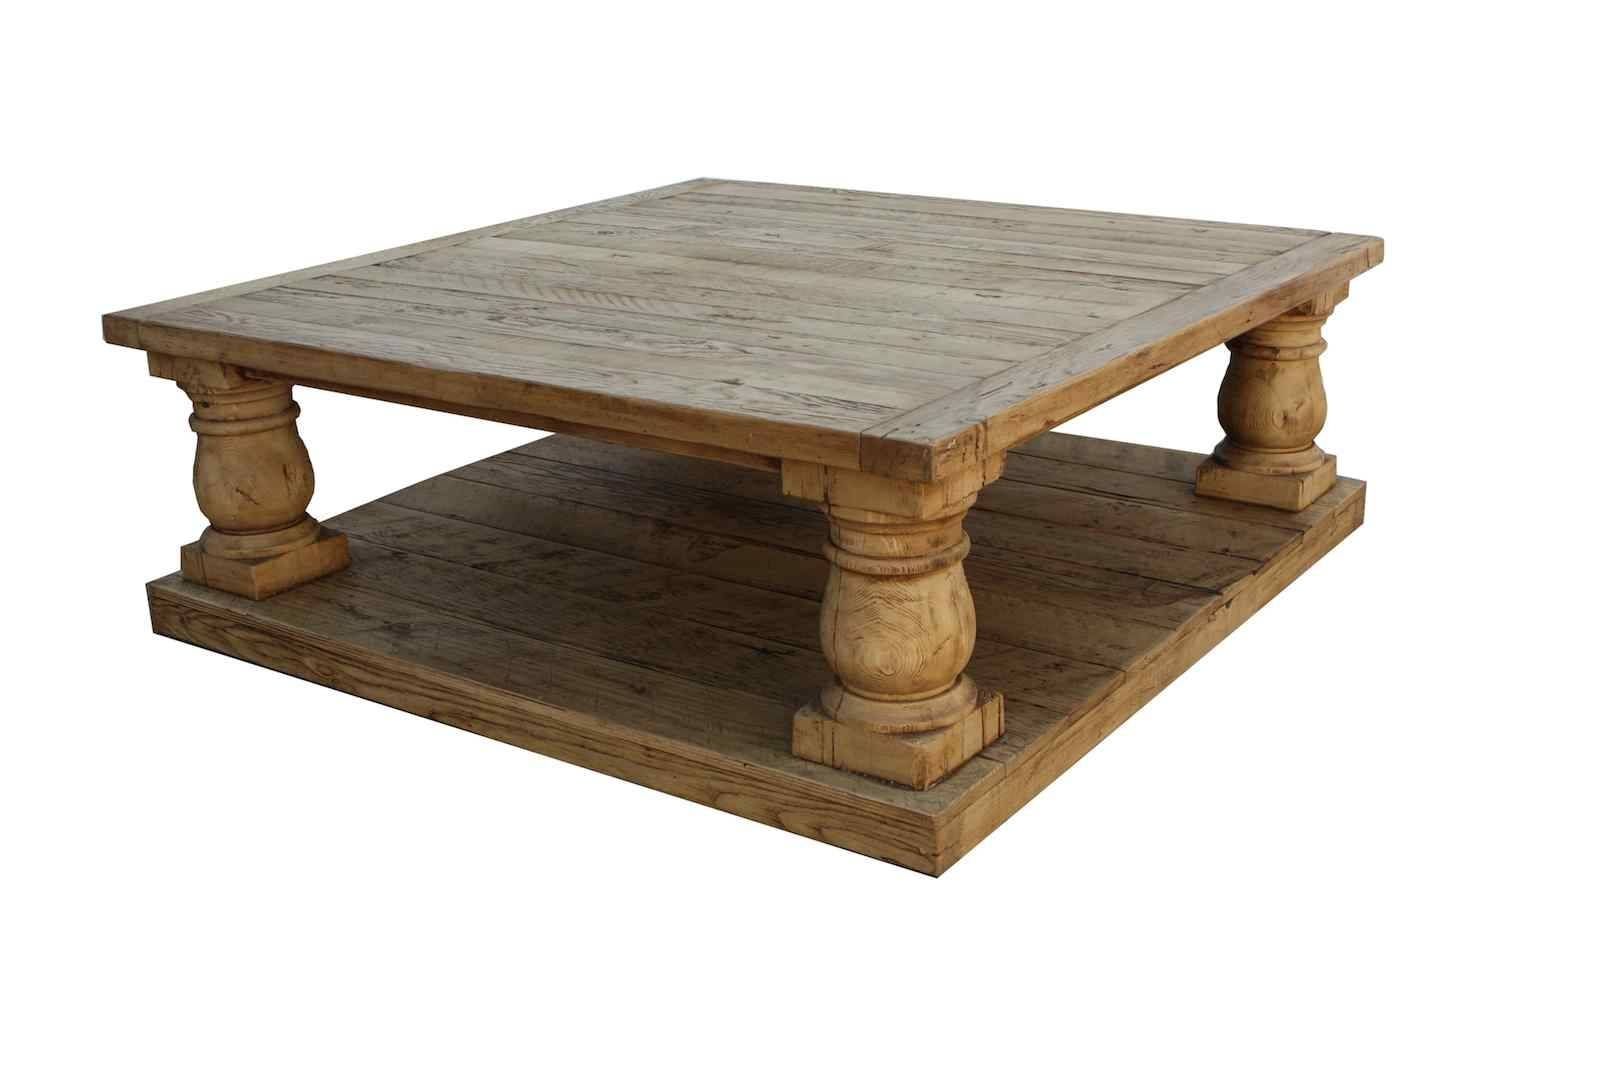 Coffee Table: Inspiringsquare Wooden Coffee Table Design Ideas Pertaining To Stylish Coffee Tables (View 7 of 30)